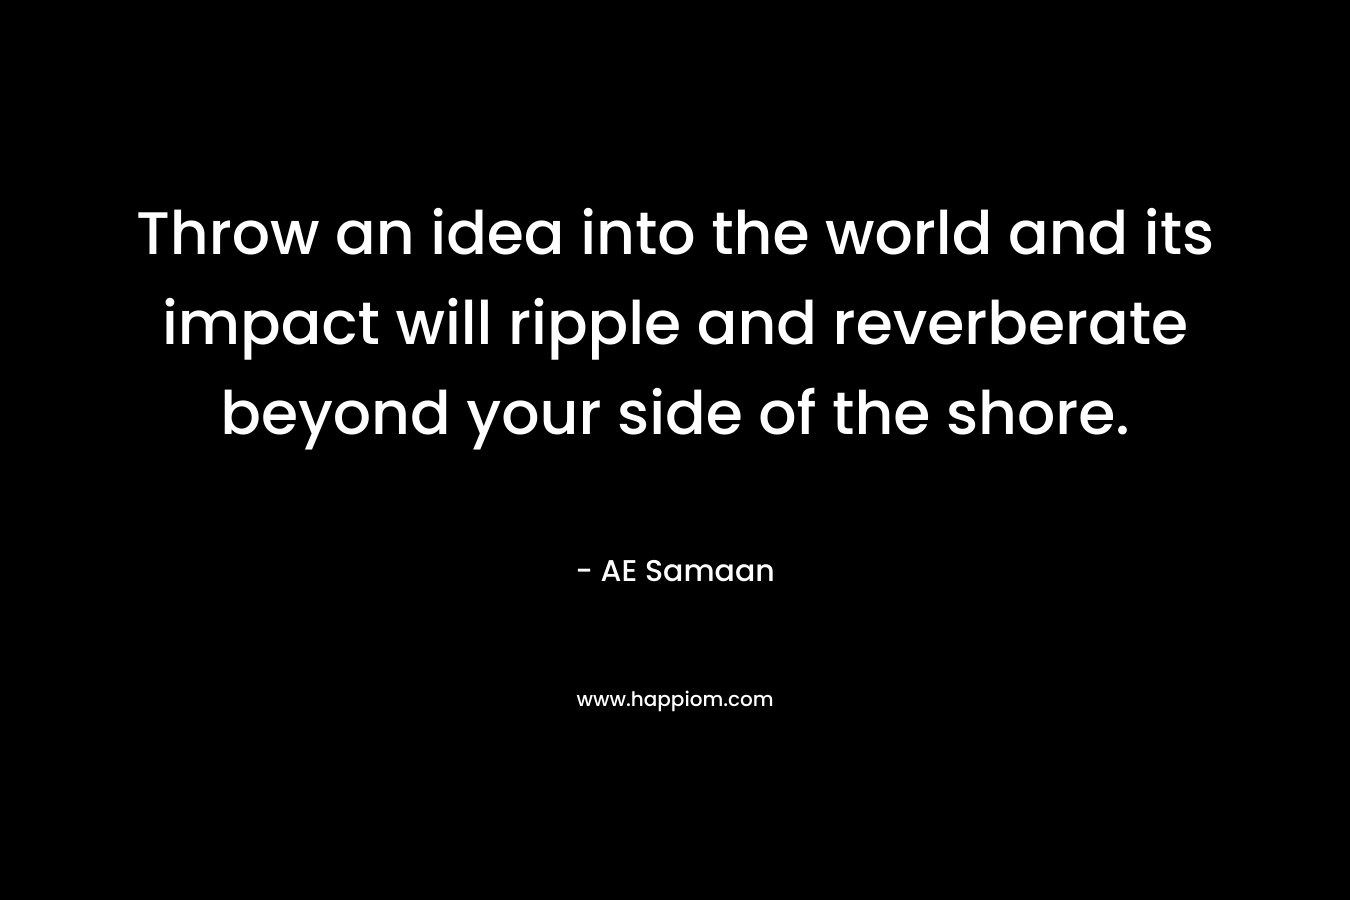 Throw an idea into the world and its impact will ripple and reverberate beyond your side of the shore.